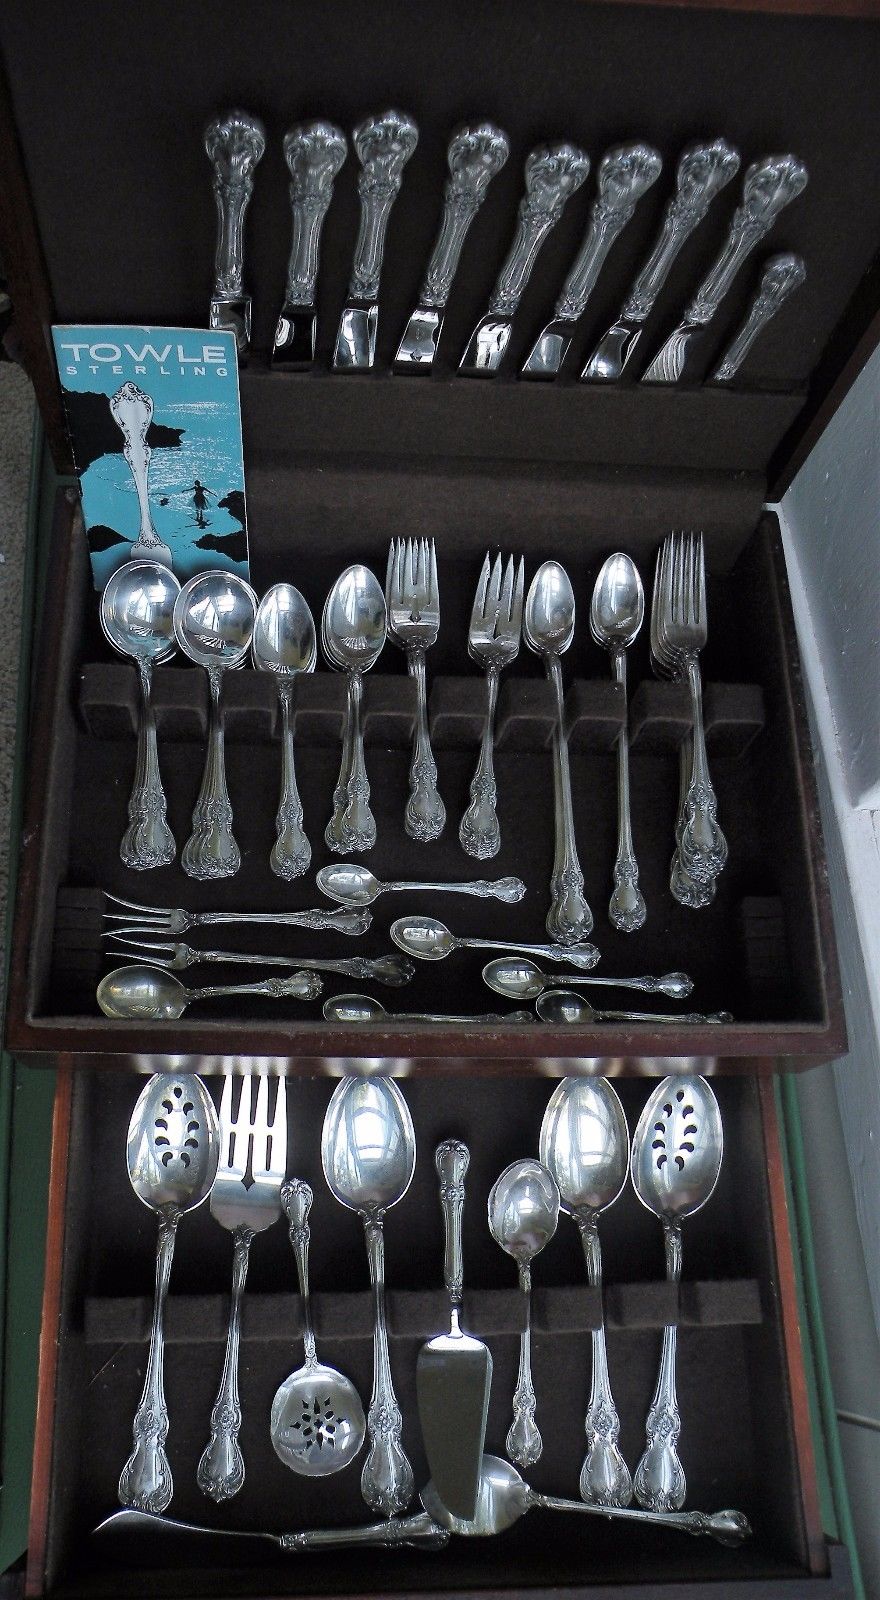 LARGE*TOWLE*OLD MASTER*STERLING SILVER FLATWARE SERVICE FOR 8 & SERVING PIECES